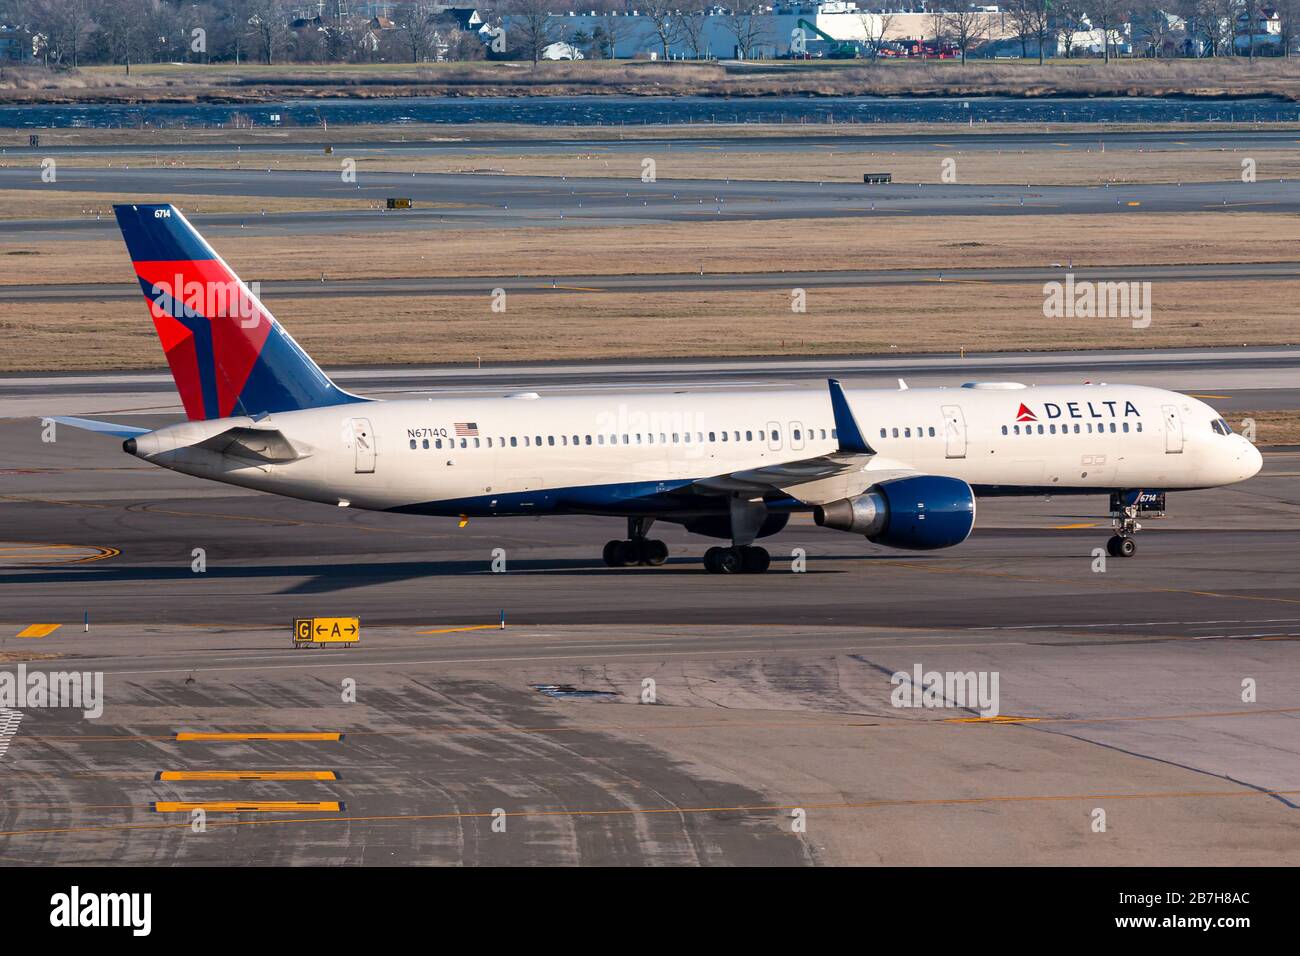 New York, USA - February 27, 2020: Delta Air Lines Boeing 757 airplane at New York John F. Kennedy airport (JFK) in the USA. Boeing is an aircraft man Stock Photo